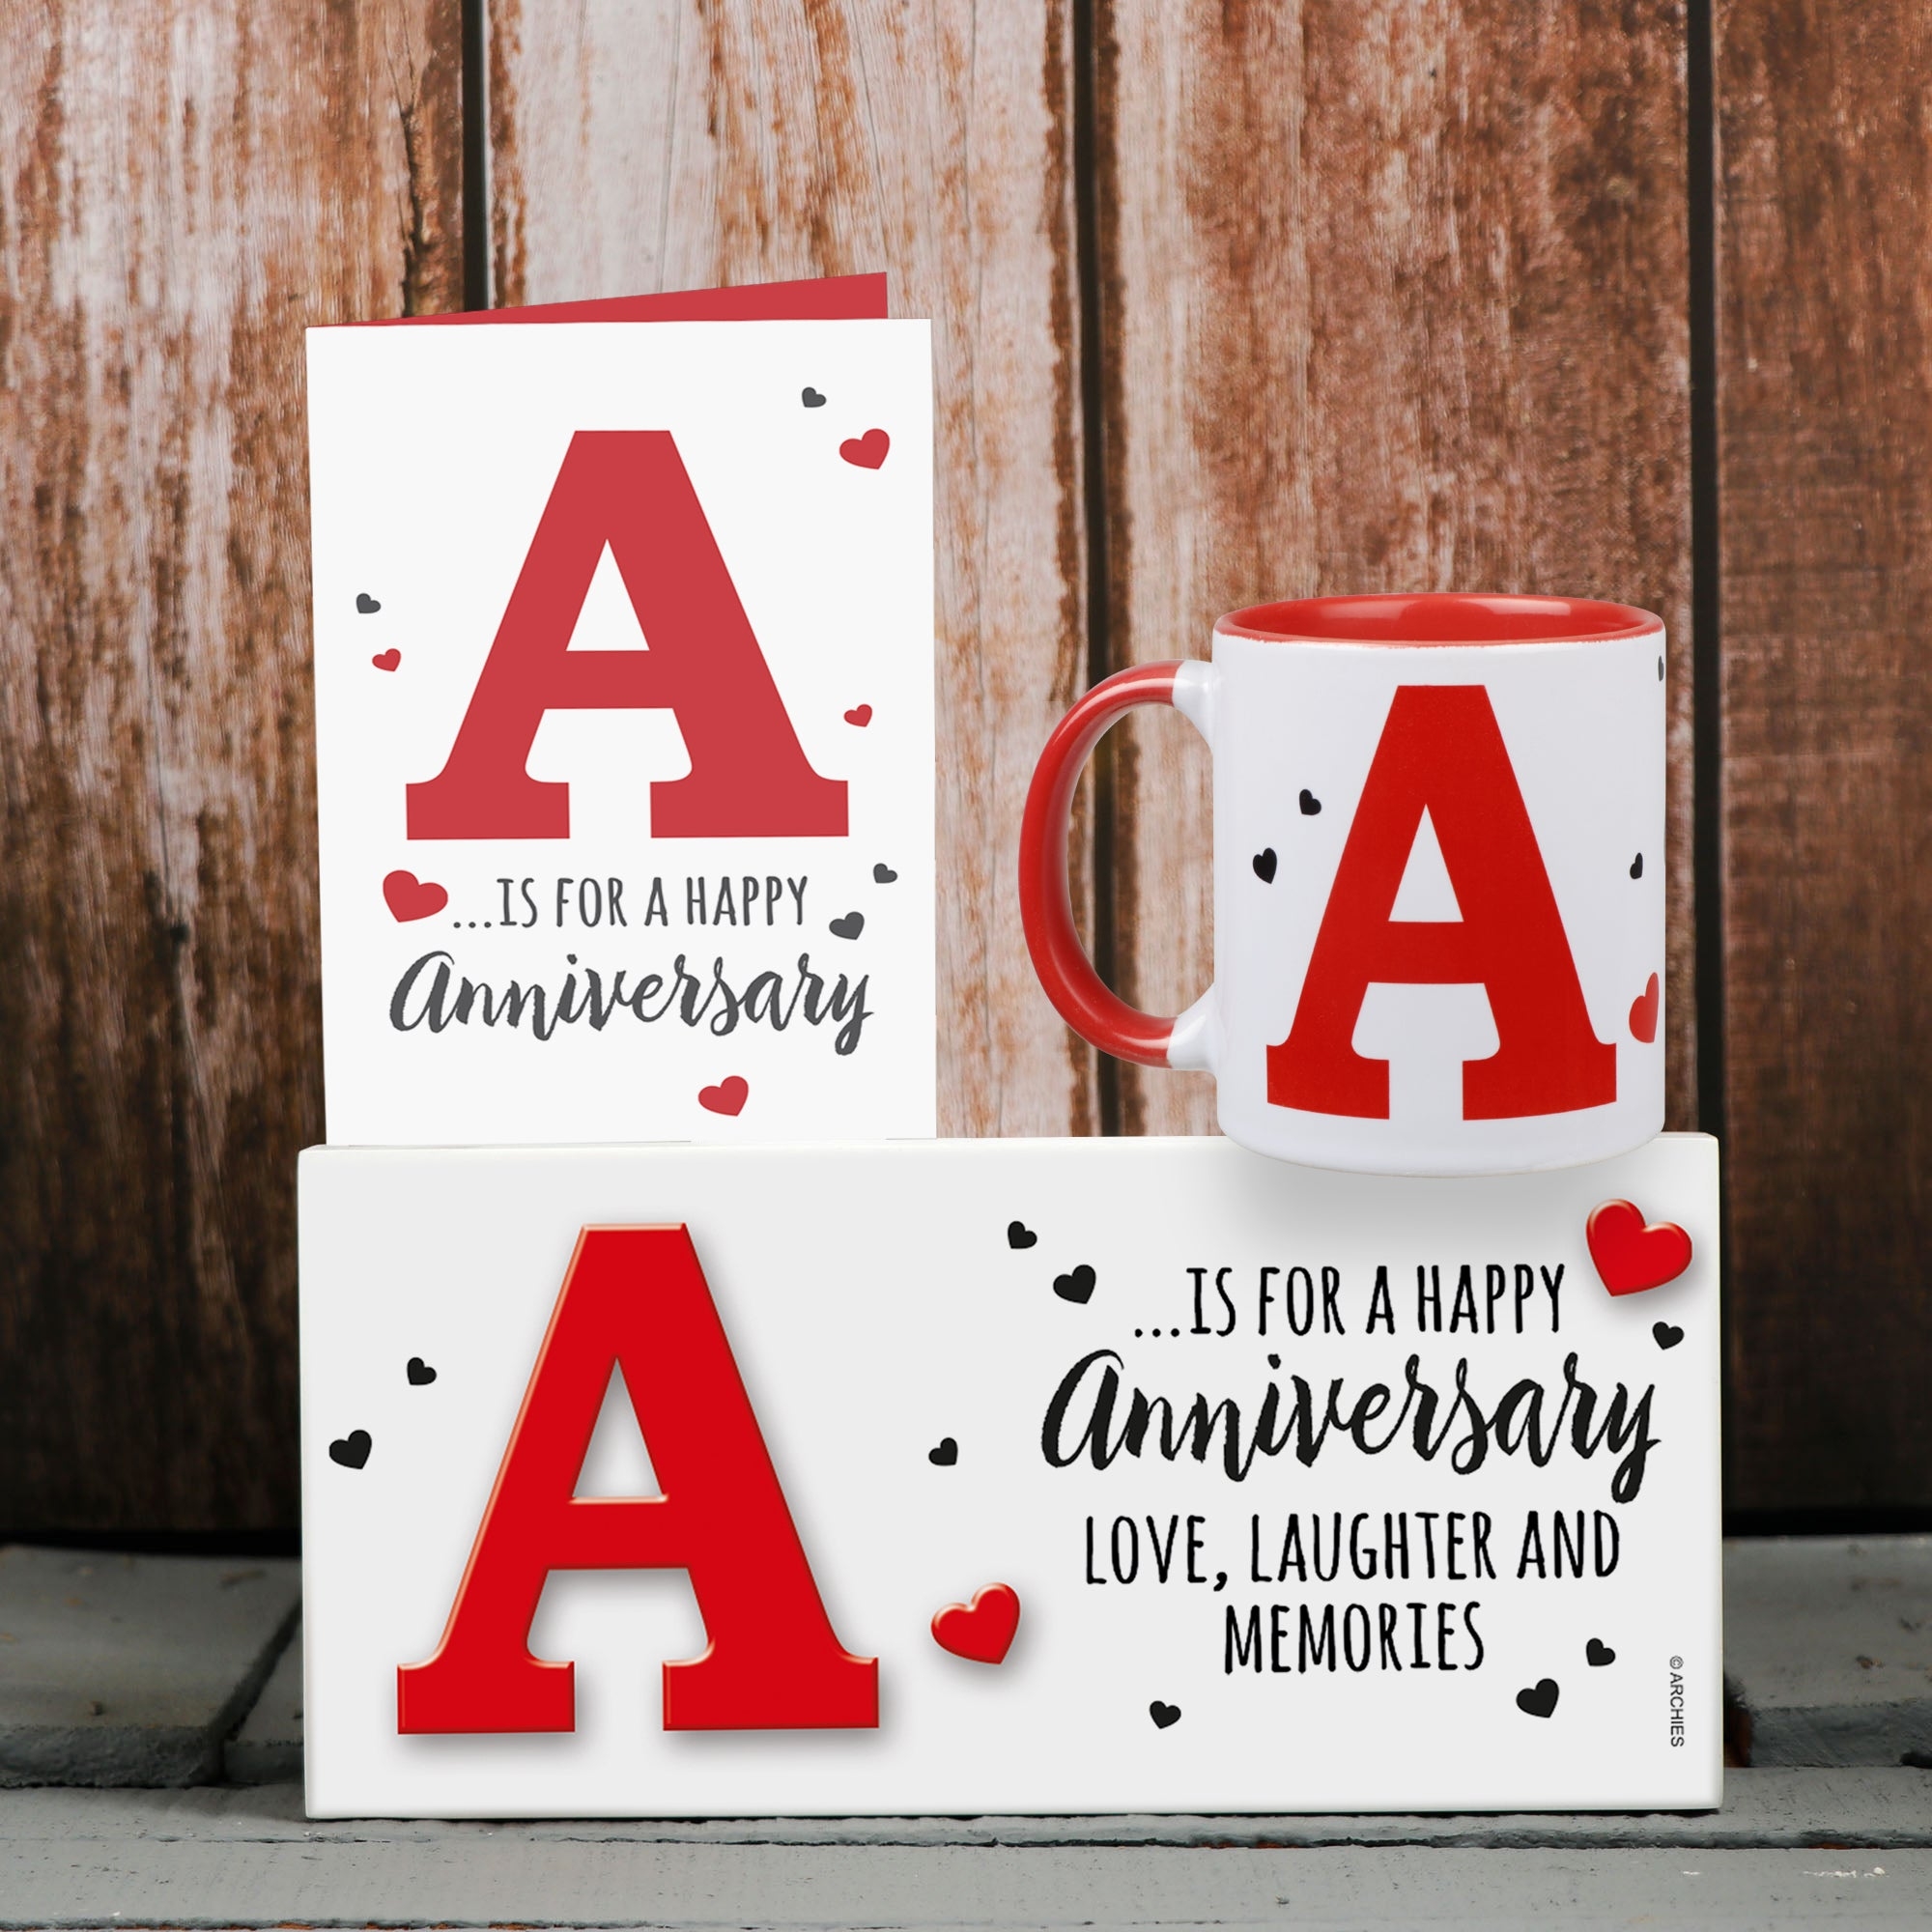 Archies KEEP SAKE Anniversary Gift Combo with Ceramic Mug and Elevated Initial Quotation - with a FREE GREETING CARD